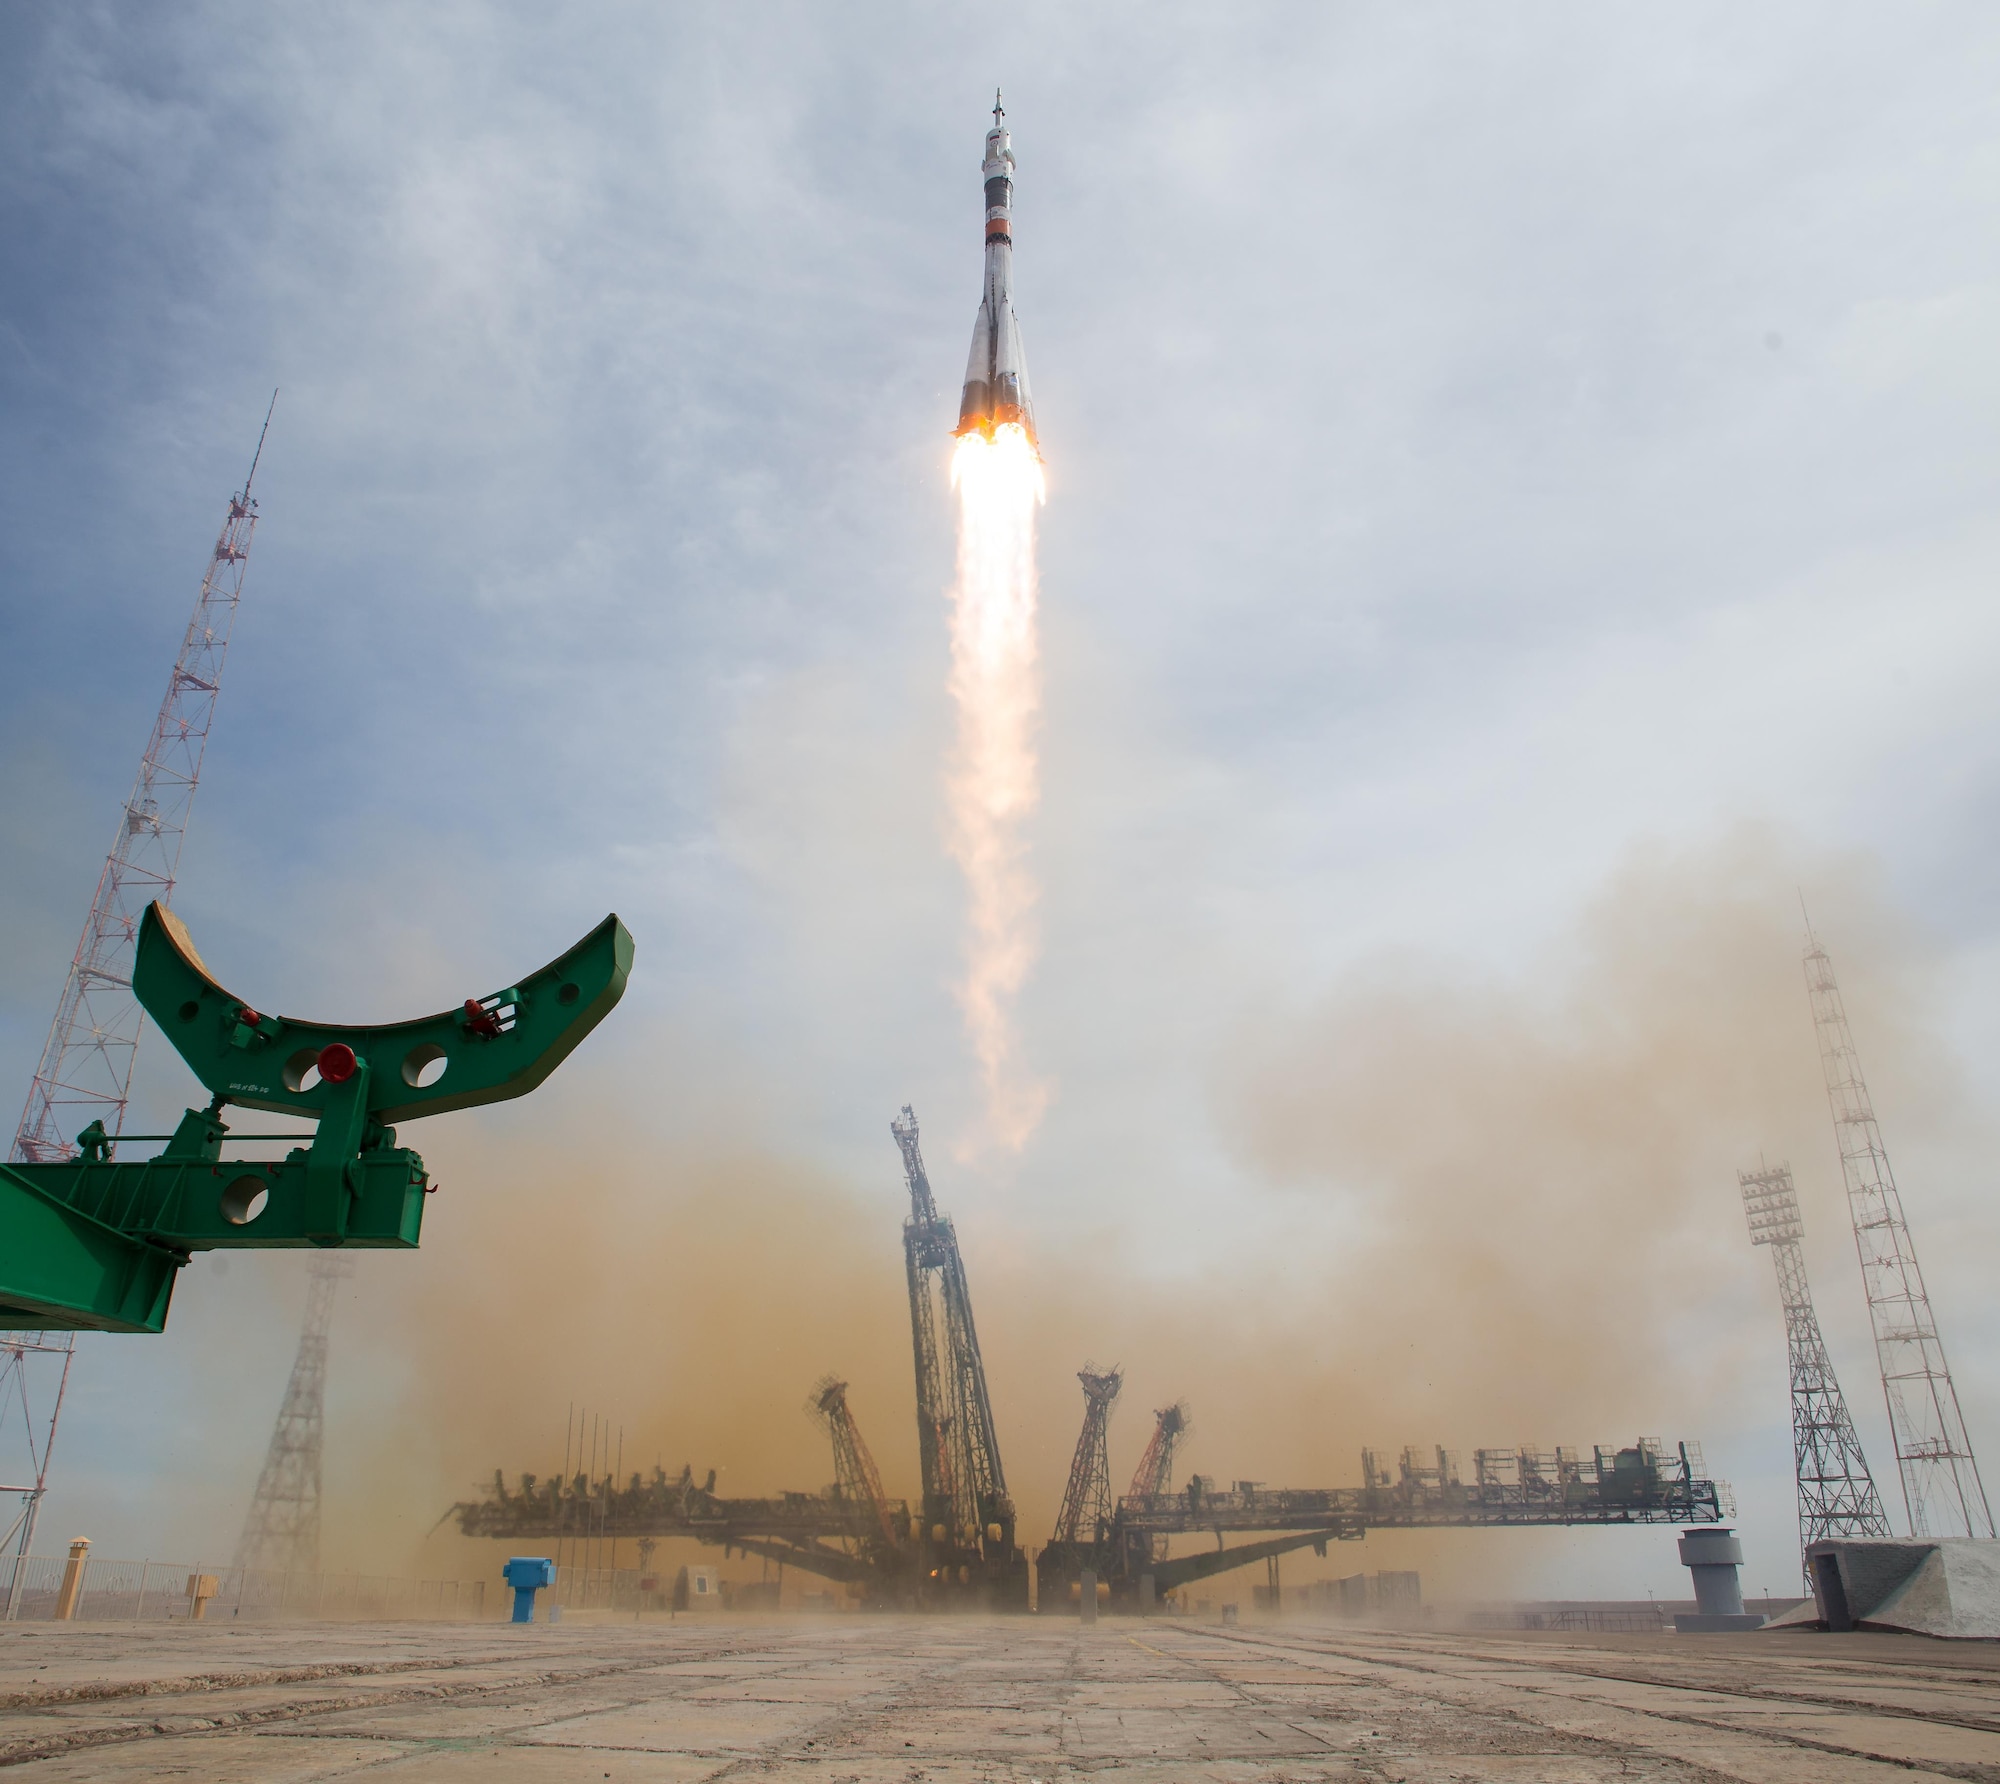 The Soyuz MS-04 rocket launches from the Baikonur Cosmodrome in Kazakhstan April 20, 2017, carrying Fyodor Yurchikhin, the Expedition 51 Soyuz commander of Roscosmos, and Col. Jack Fischer, the Expedition 51 NASA flight engineer, into orbit to begin their four and a half month mission on the International Space Station. (NASA photo/Aubrey Gemignani)